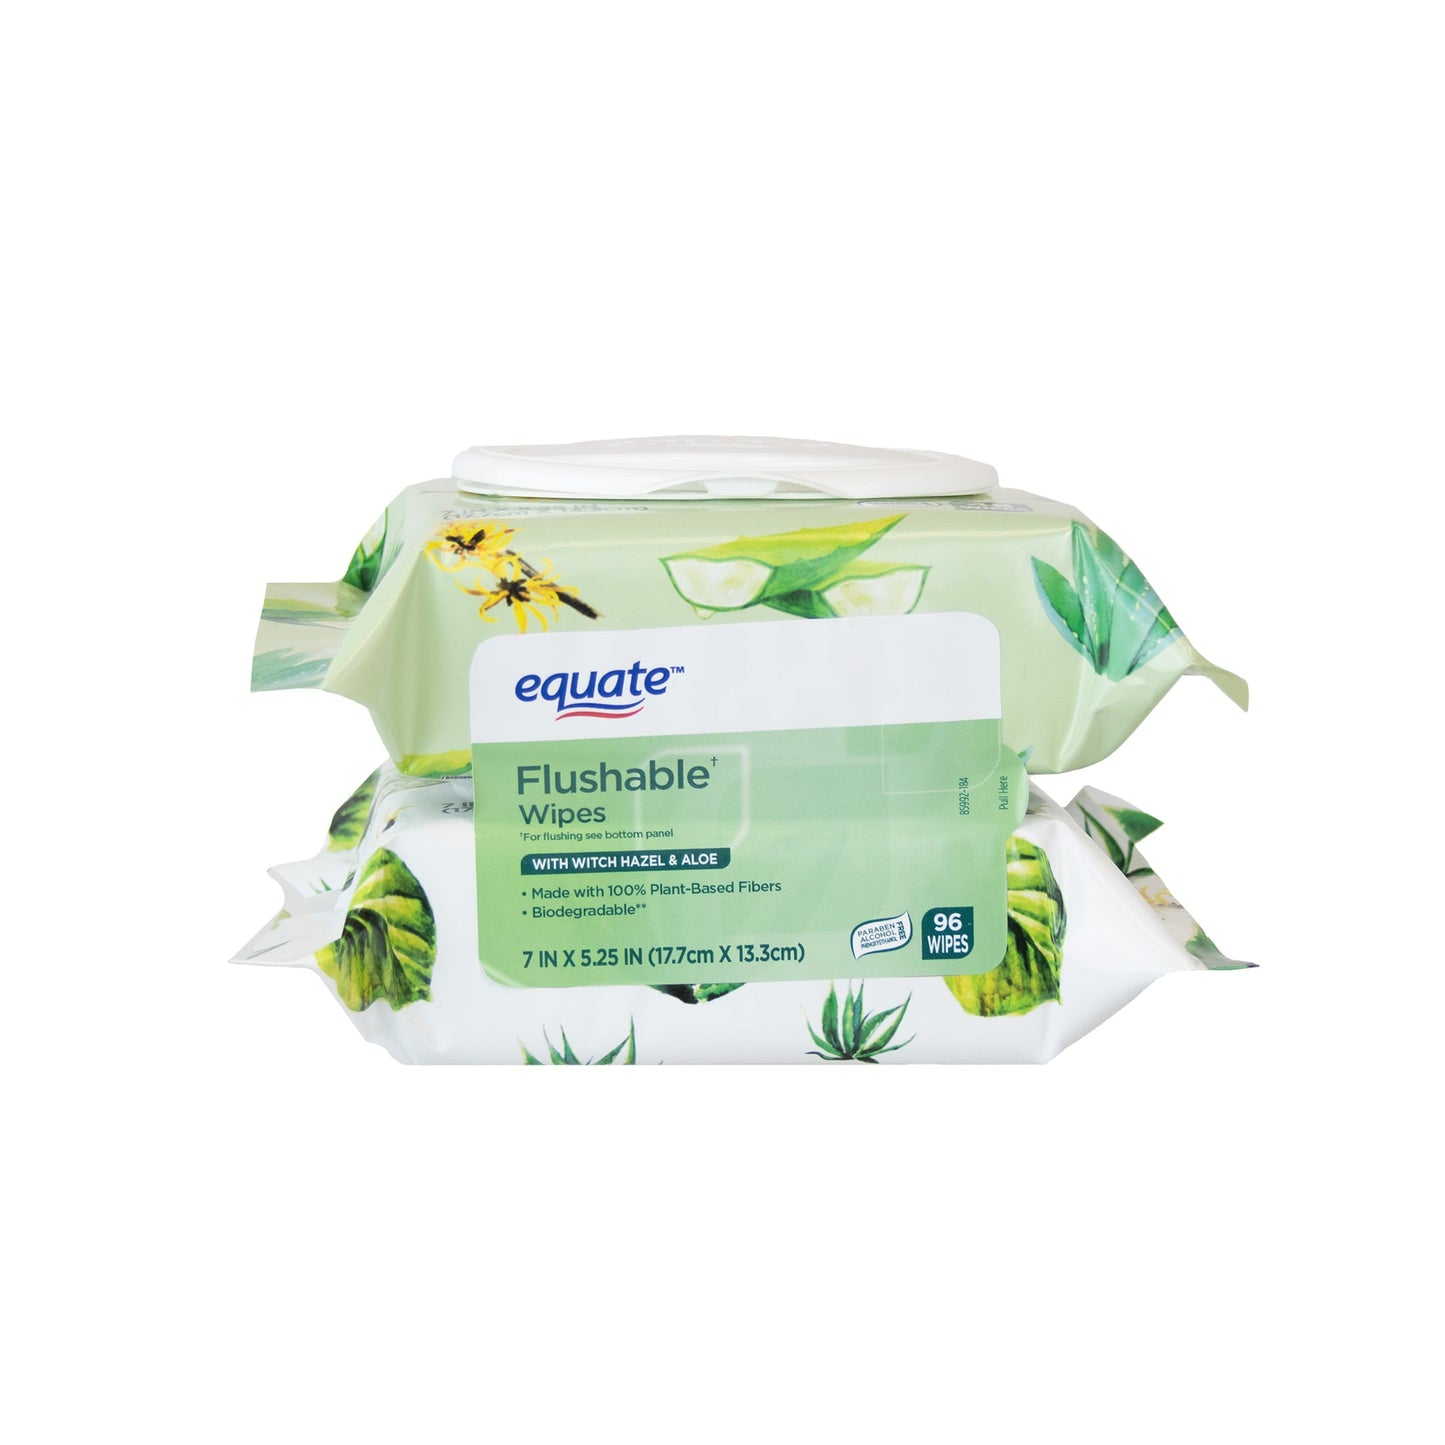 Equate Witch Hazel and Aloe Scent Flushable Wipes, 2 Flip-Top Packs (96 Total Wipes)